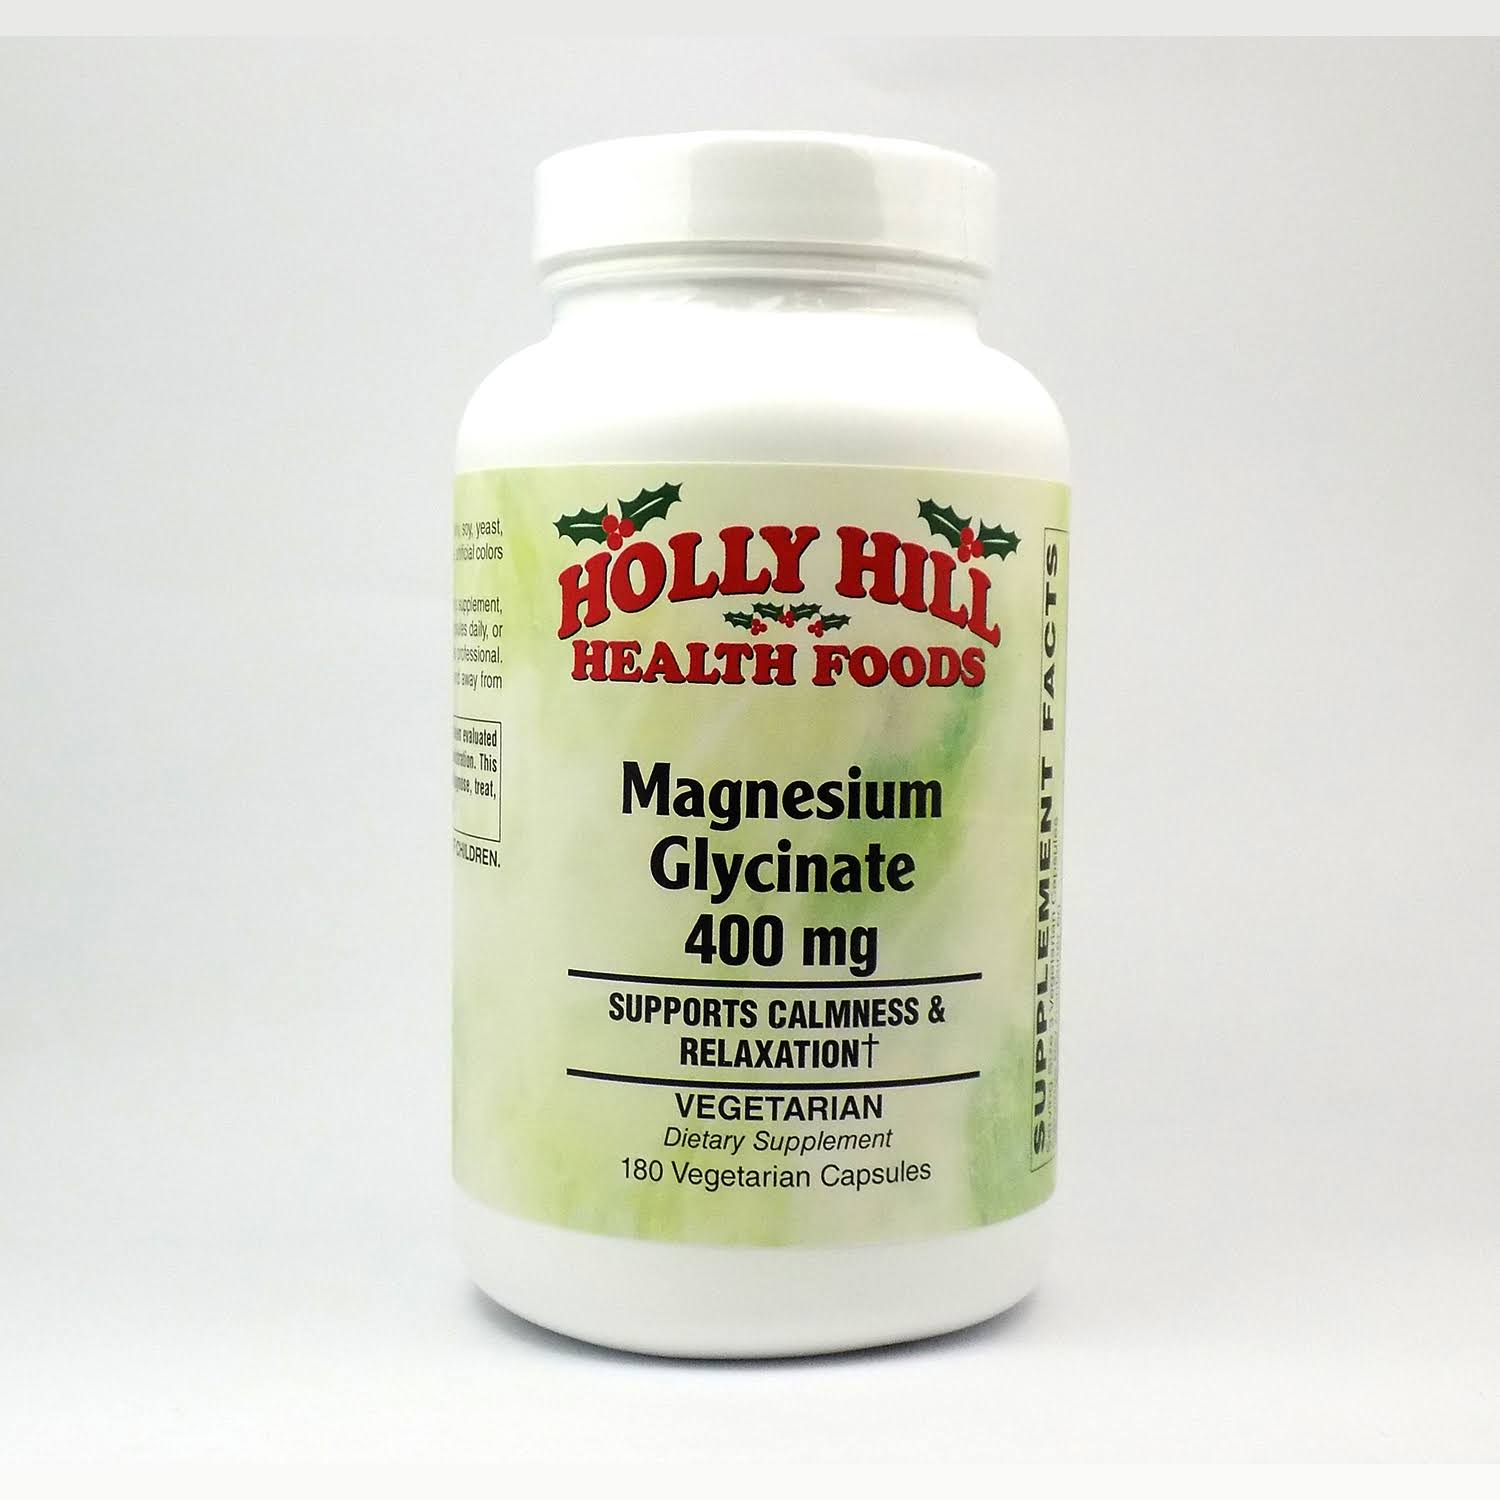 Holly Hill Health Foods Magnesium Glycinate 400mg, 180 Vegetable Capsu